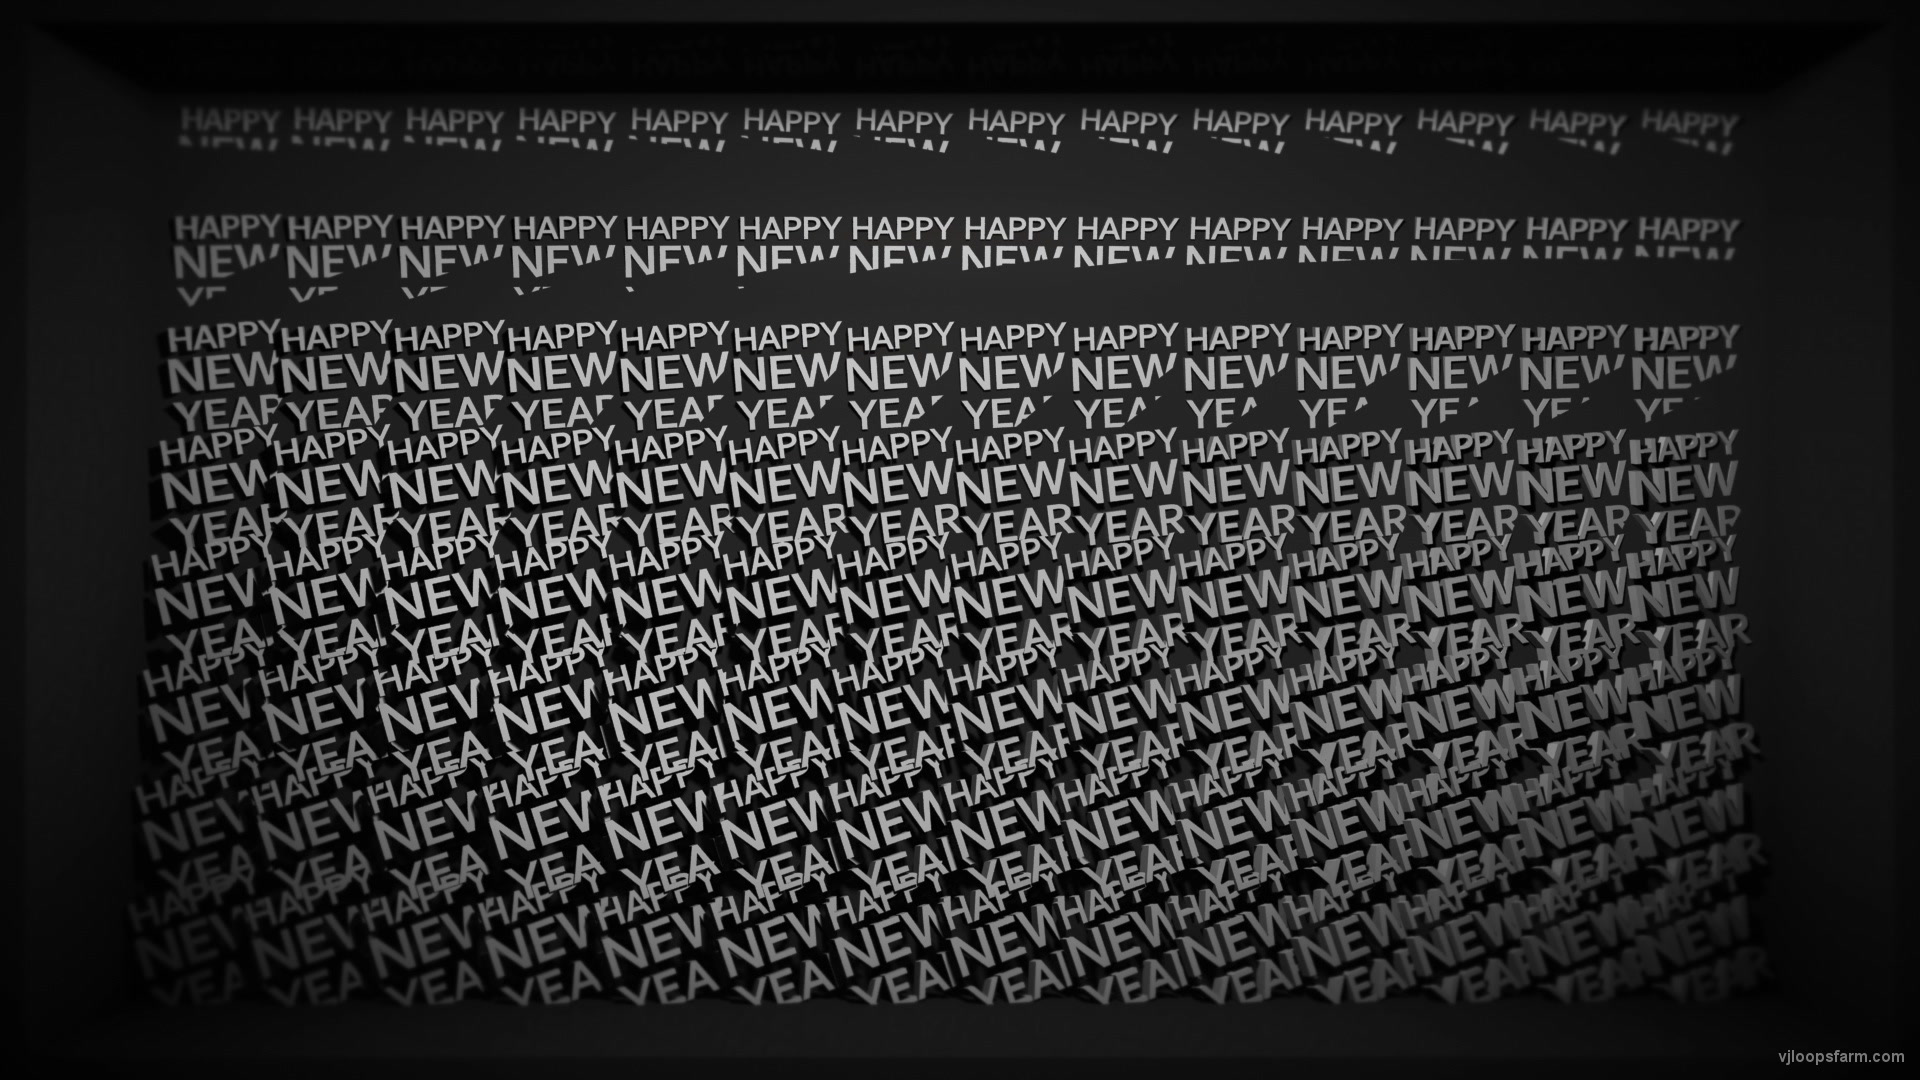 HAPPY NEW YEAR Displace Text Full HD Video Mapping Loop